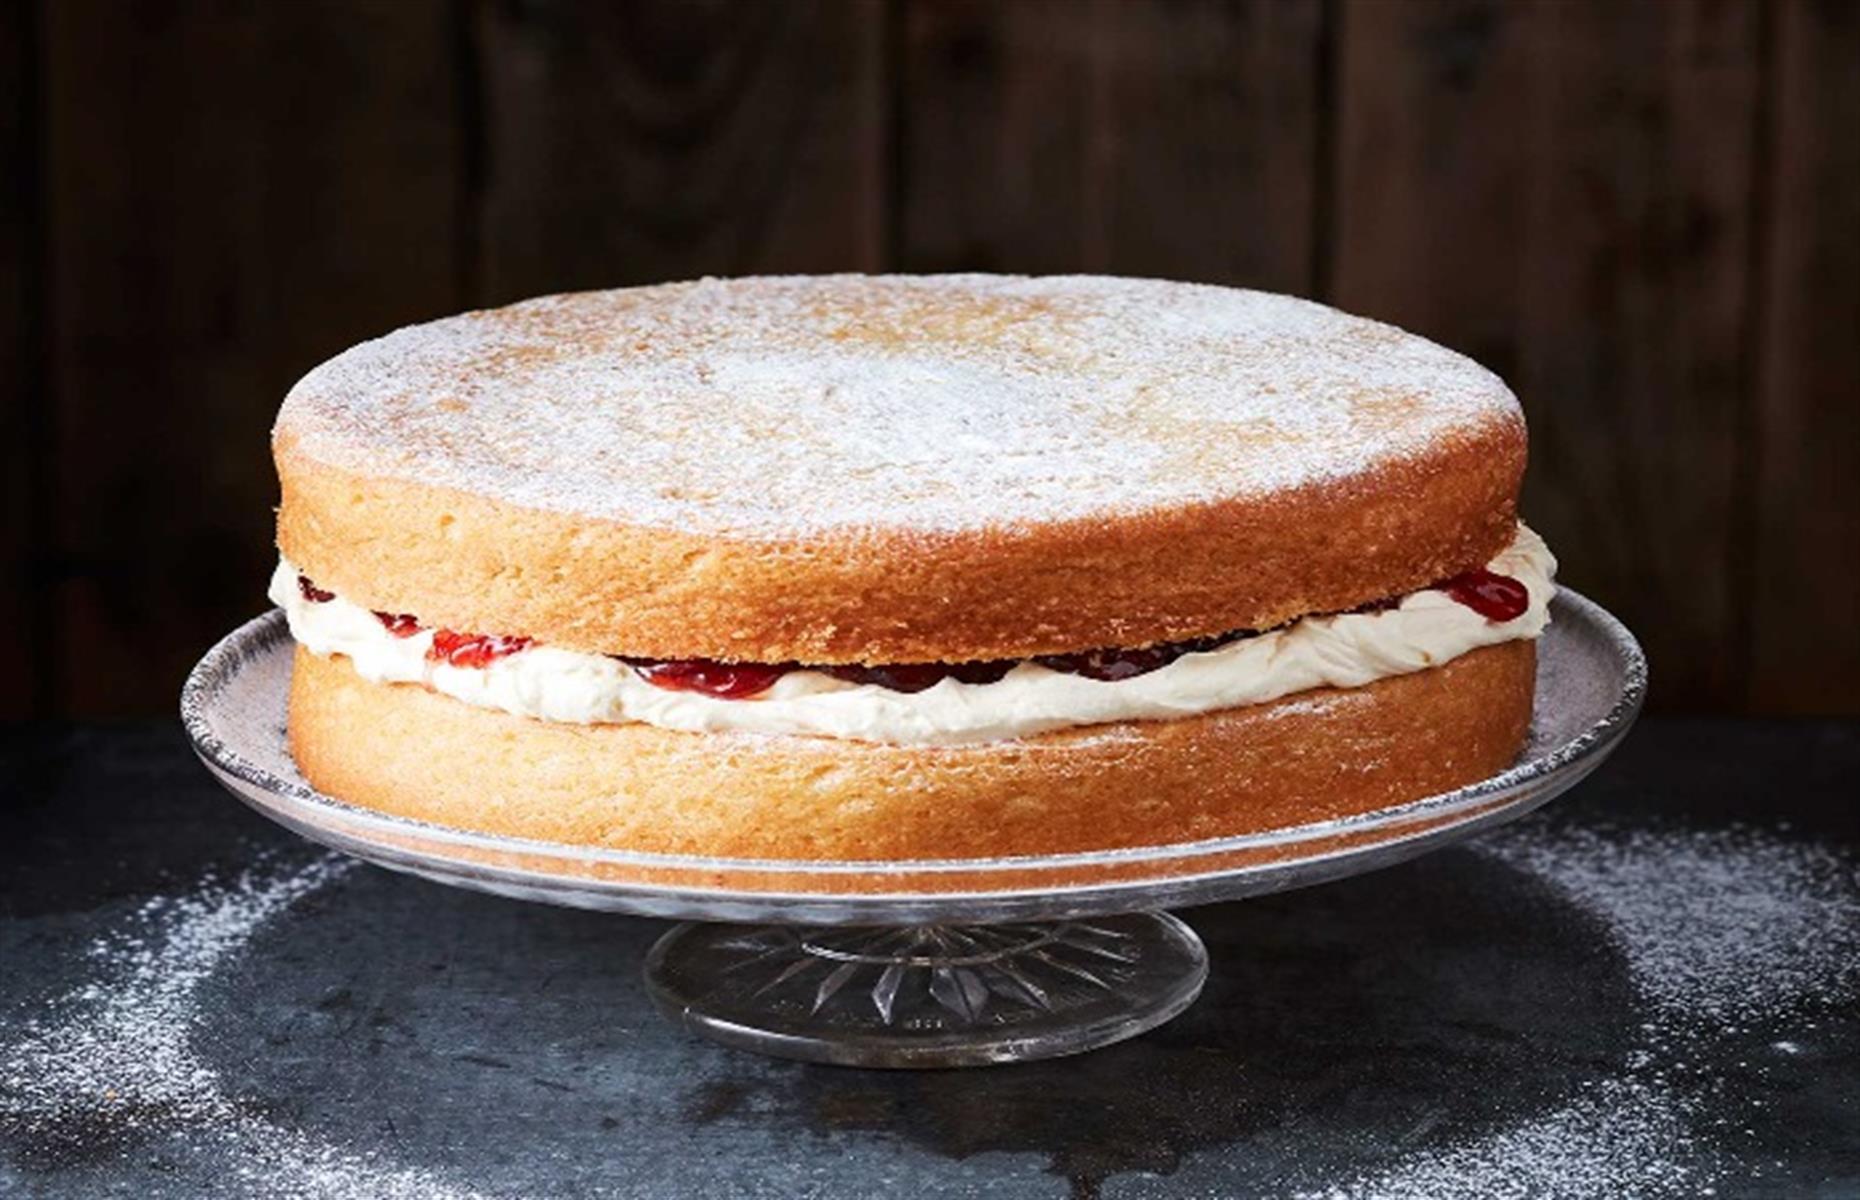 Top tips and tricks to become a brilliant baker